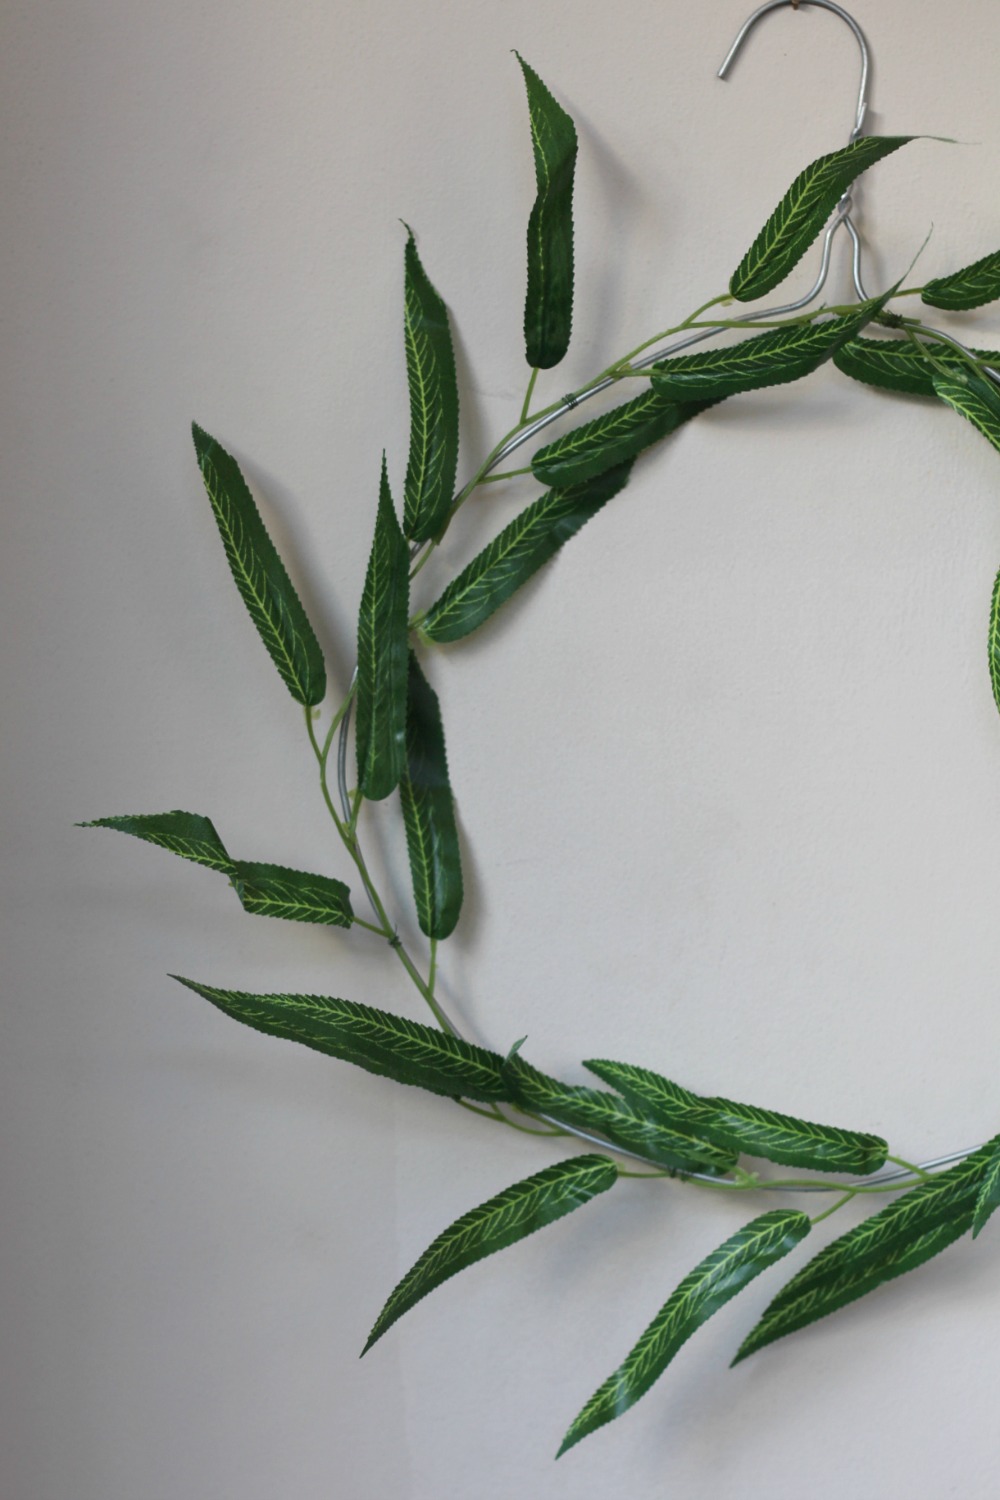 The Style Aesthetic | Lifestyle Blog | Willow Wreath DIY